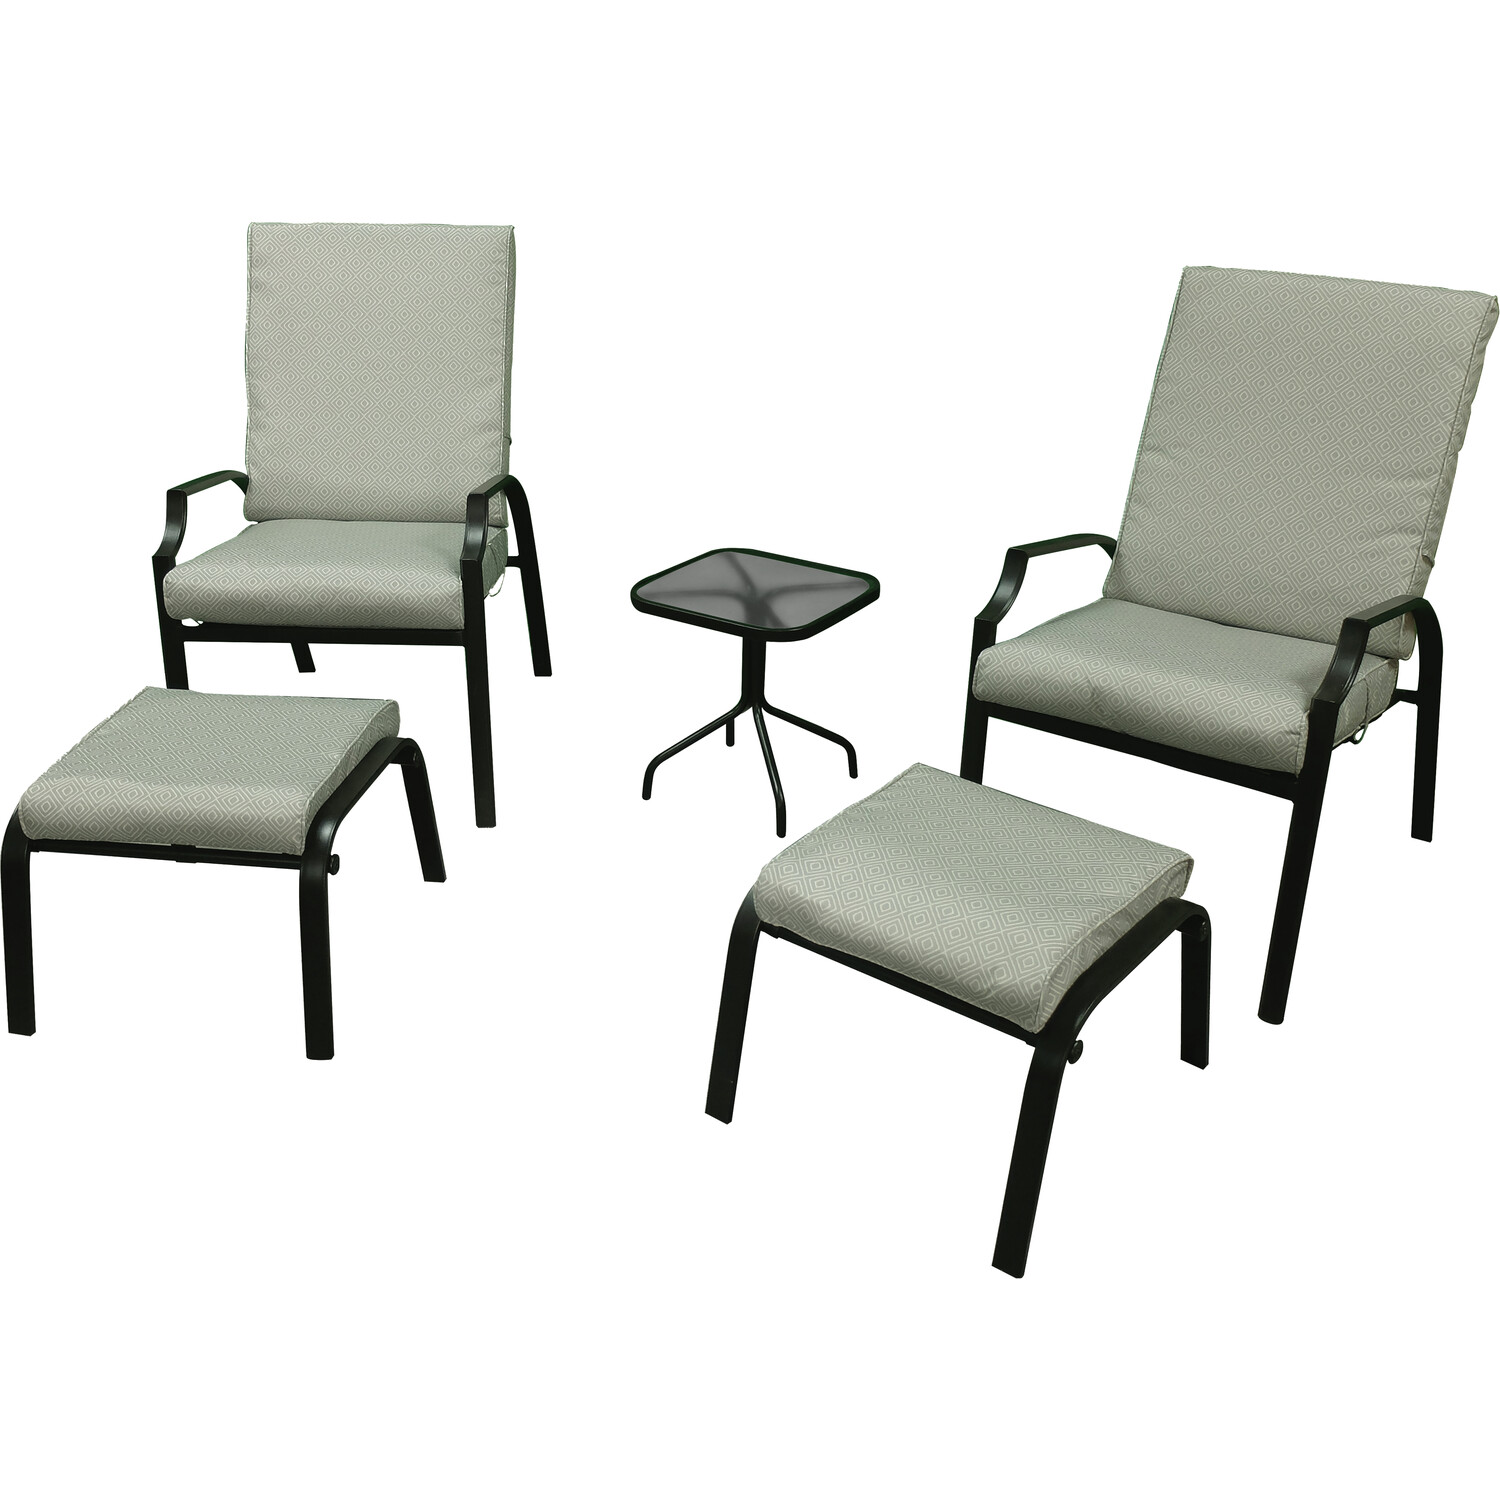 Malay Riviera Steel 2 Seater Bistro Set with Footrests Sage Image 2